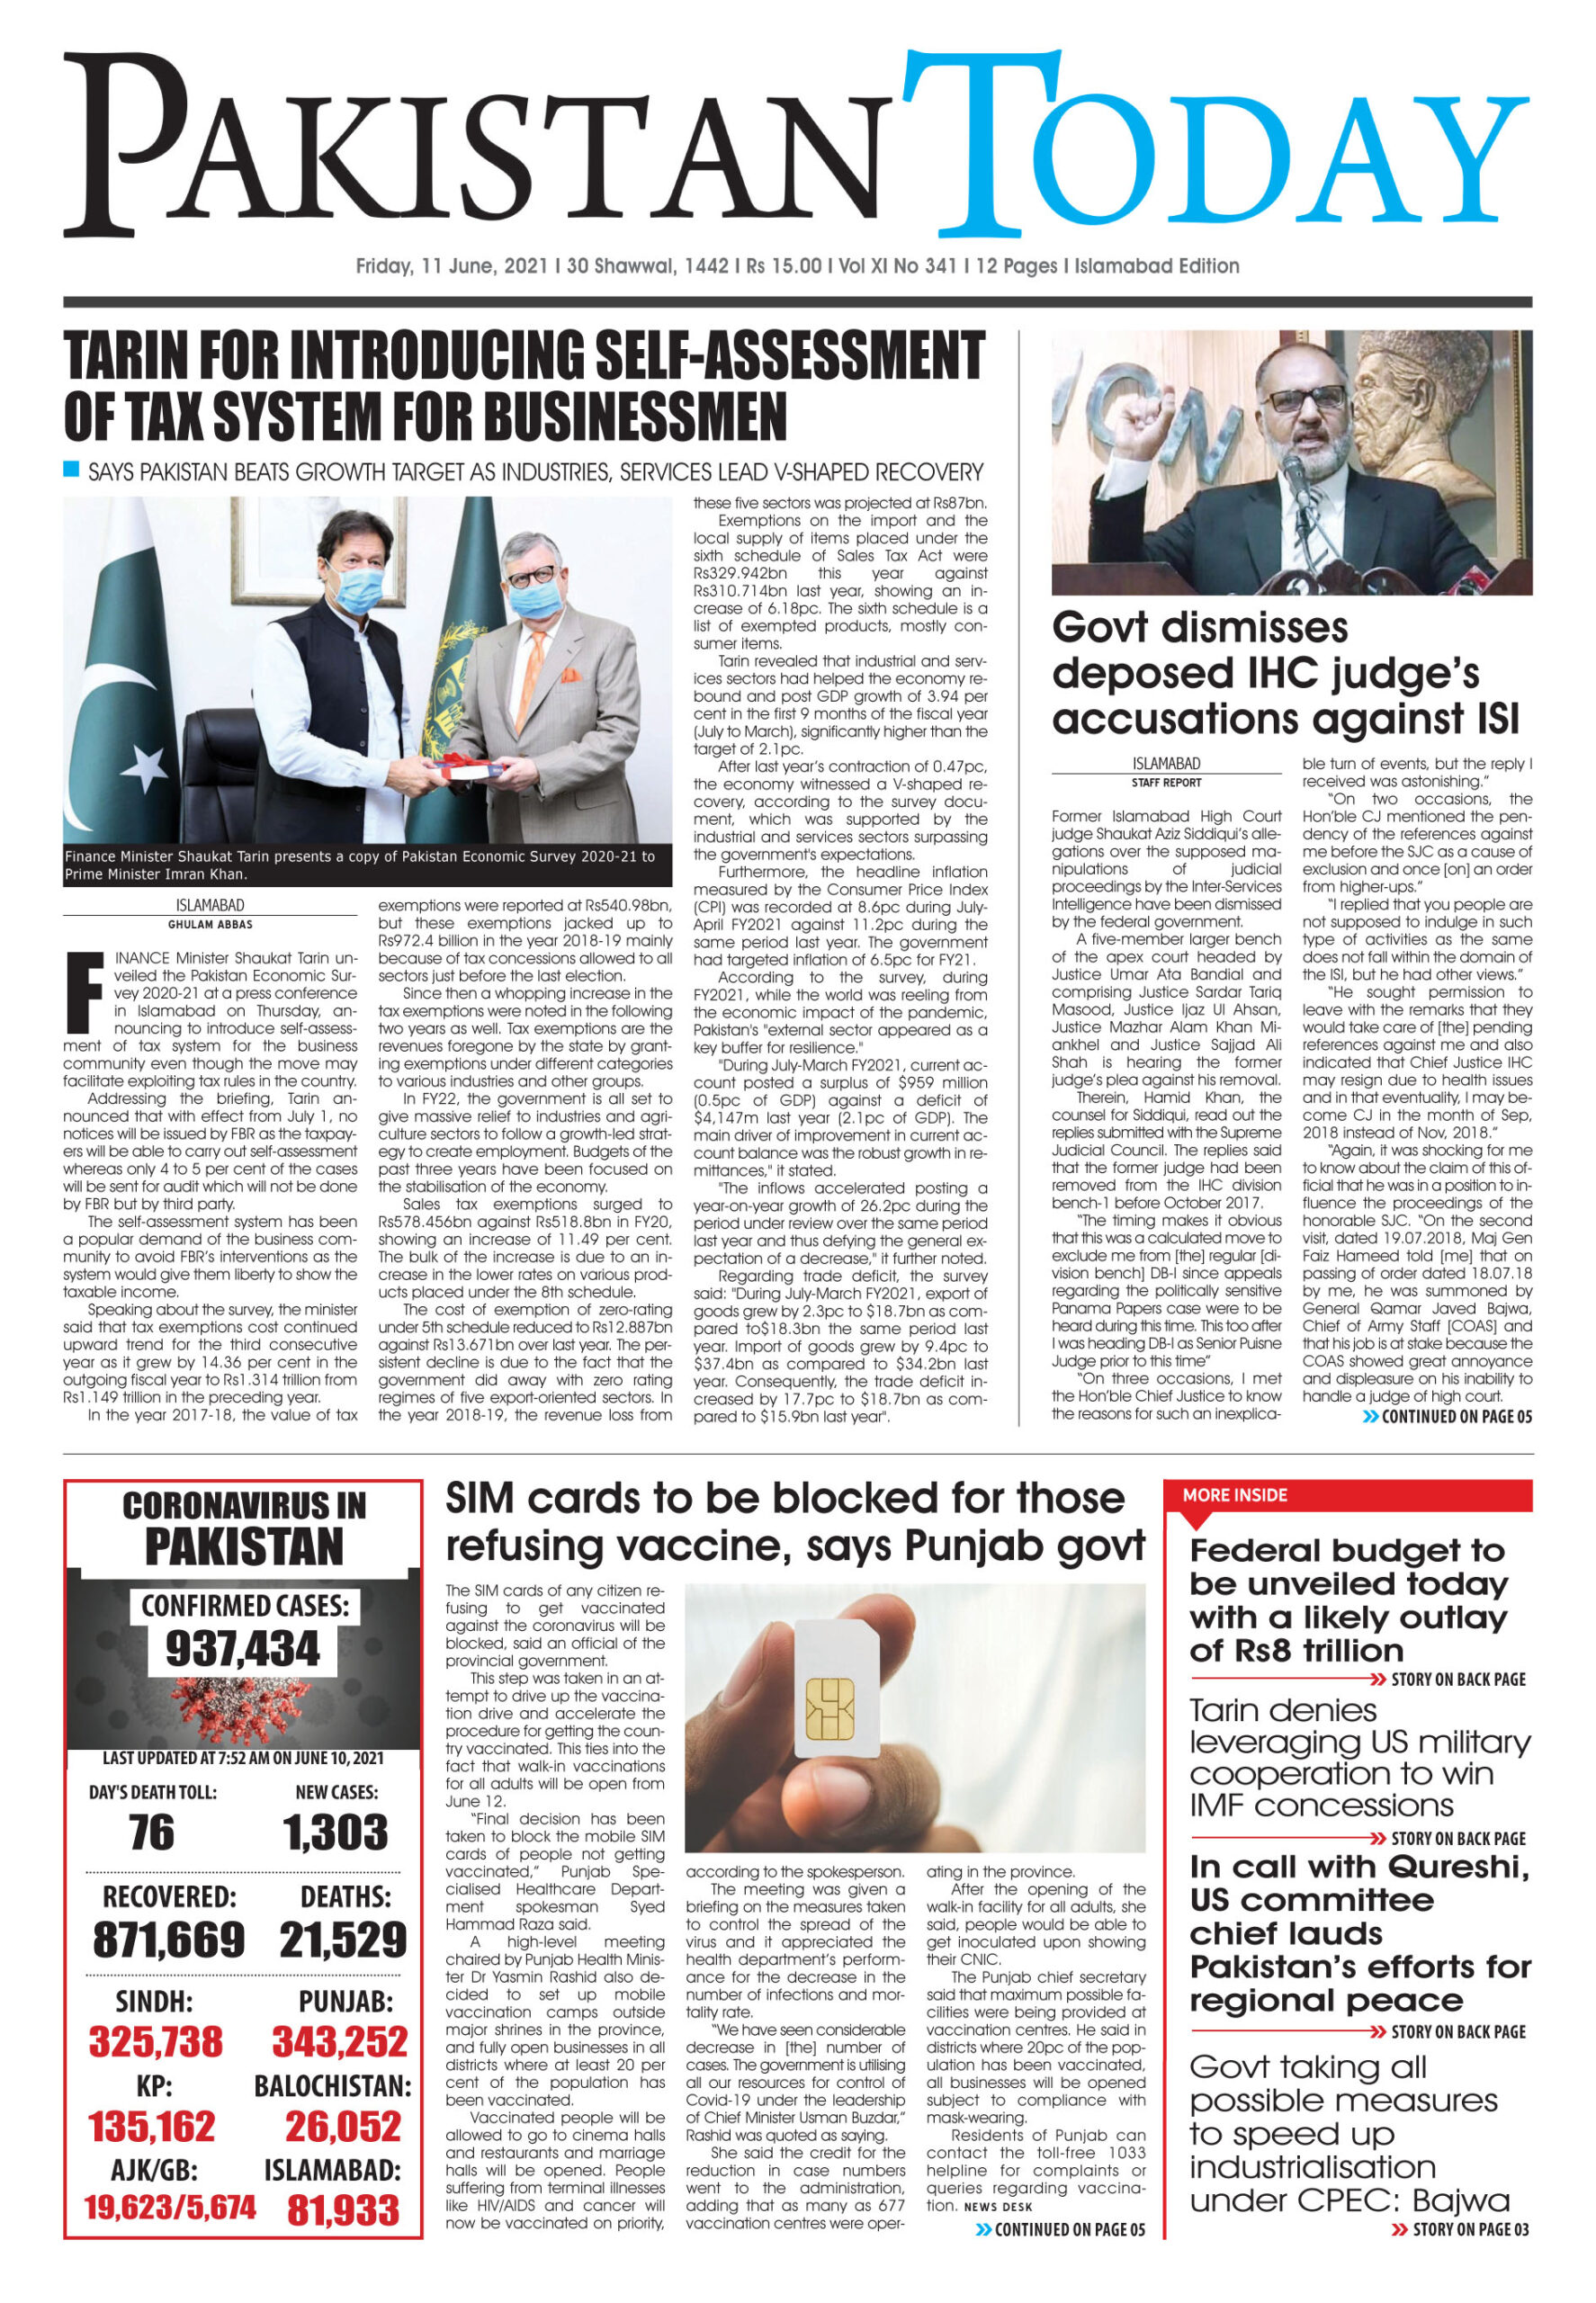 01 Front Page 11 6 21 Isb Pakistan Today